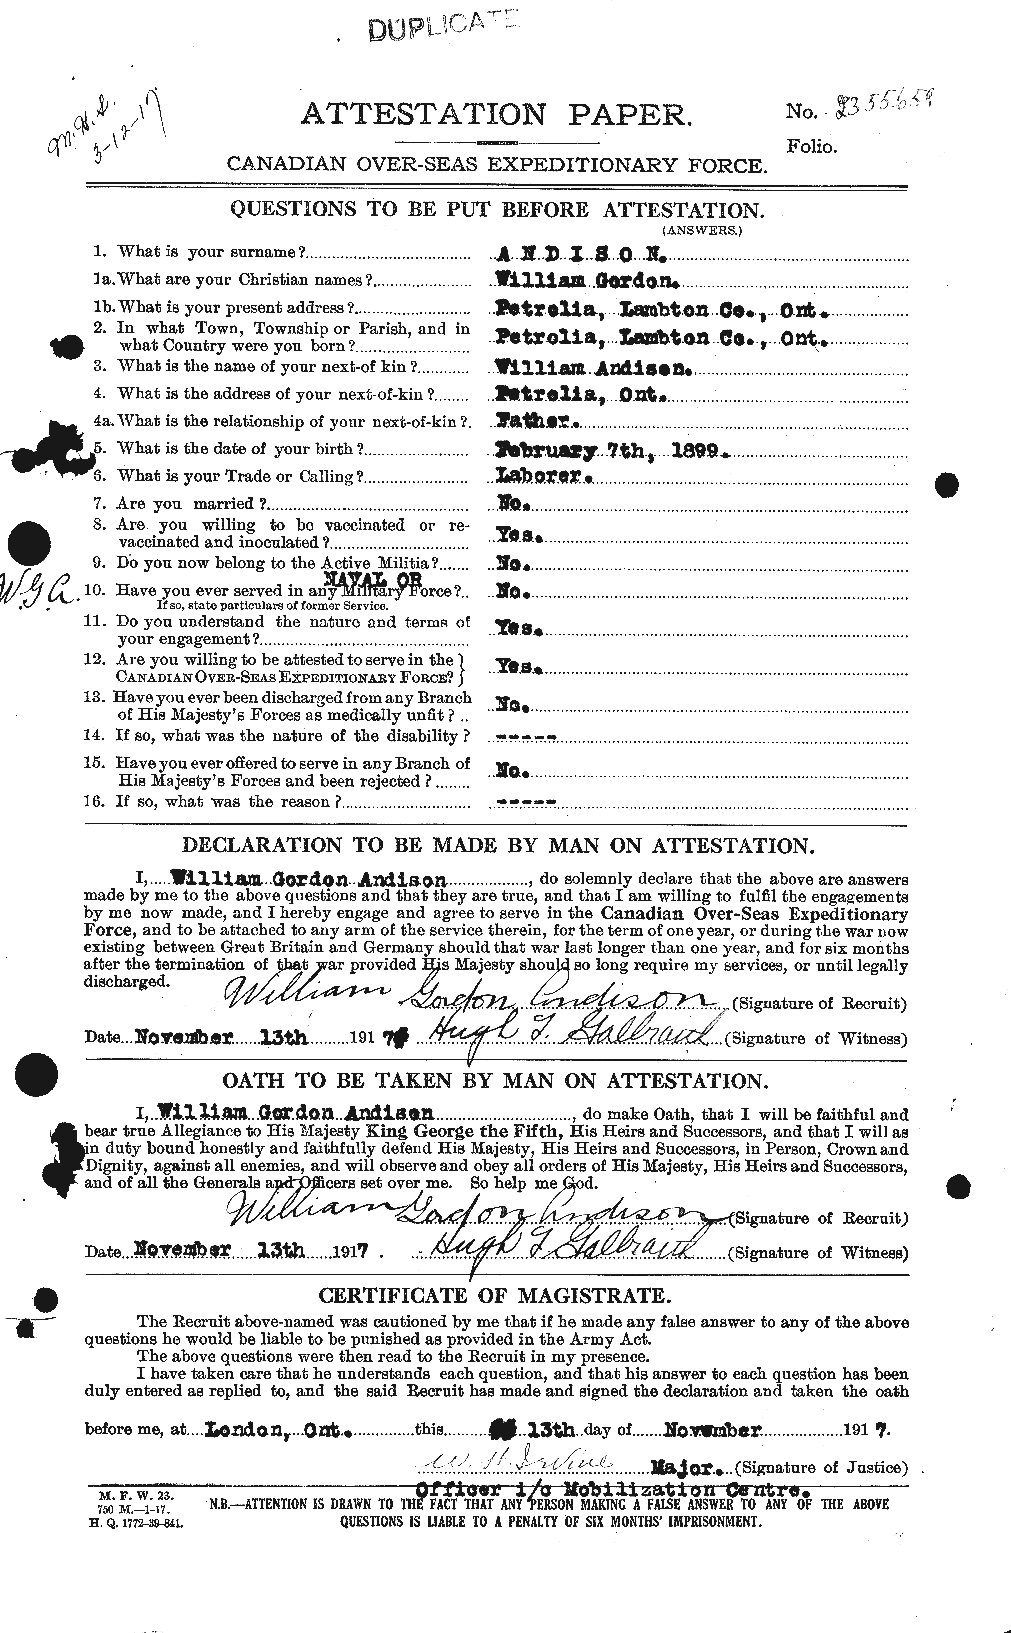 Personnel Records of the First World War - CEF 210881a